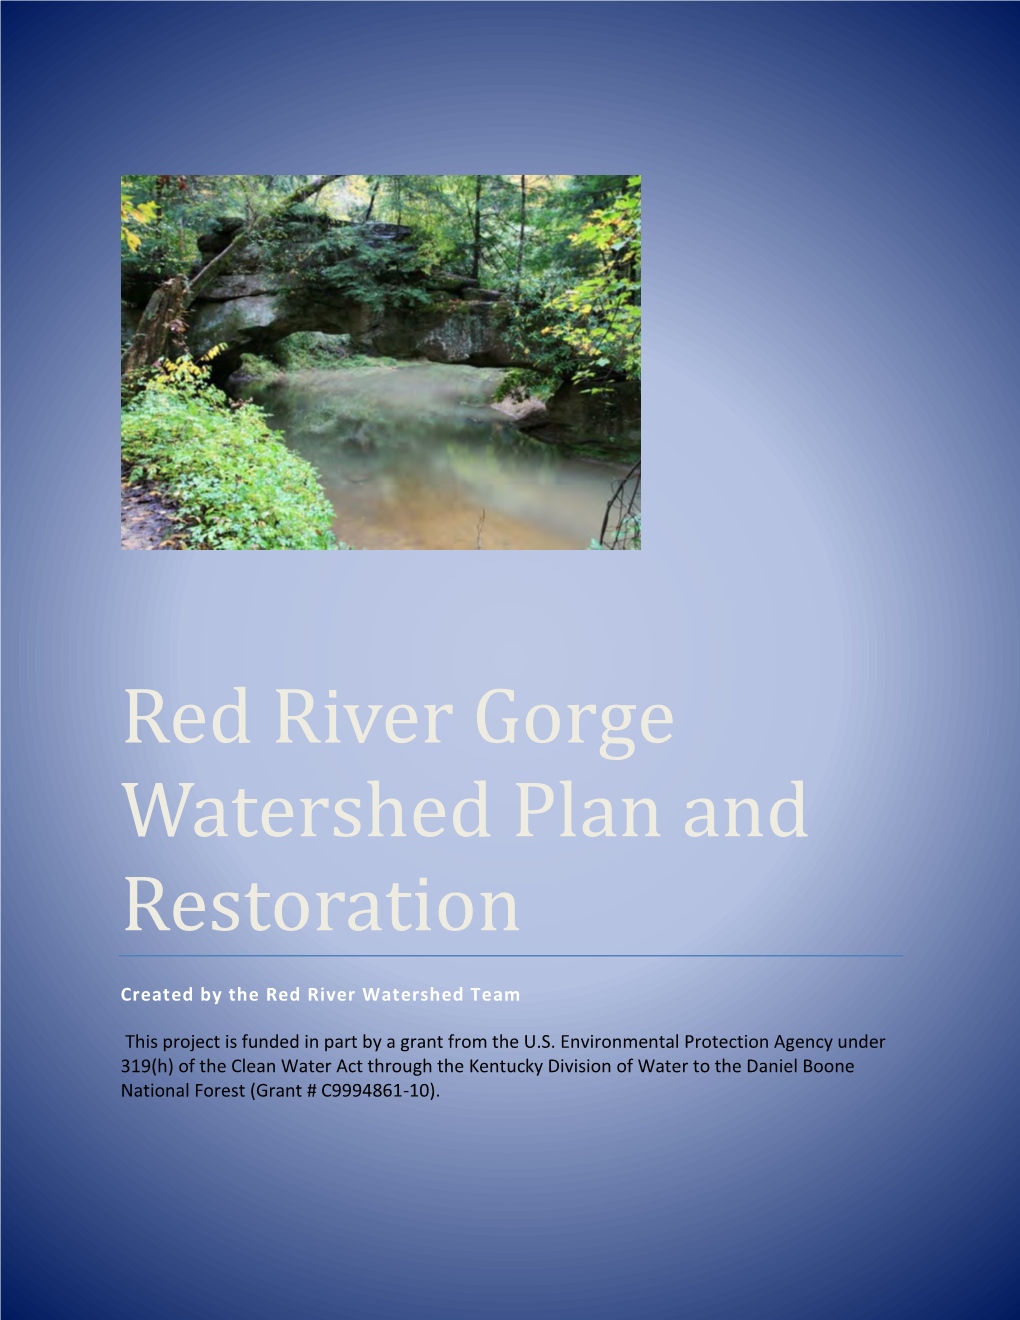 Red River Gorge Watershed Plan and Restoration